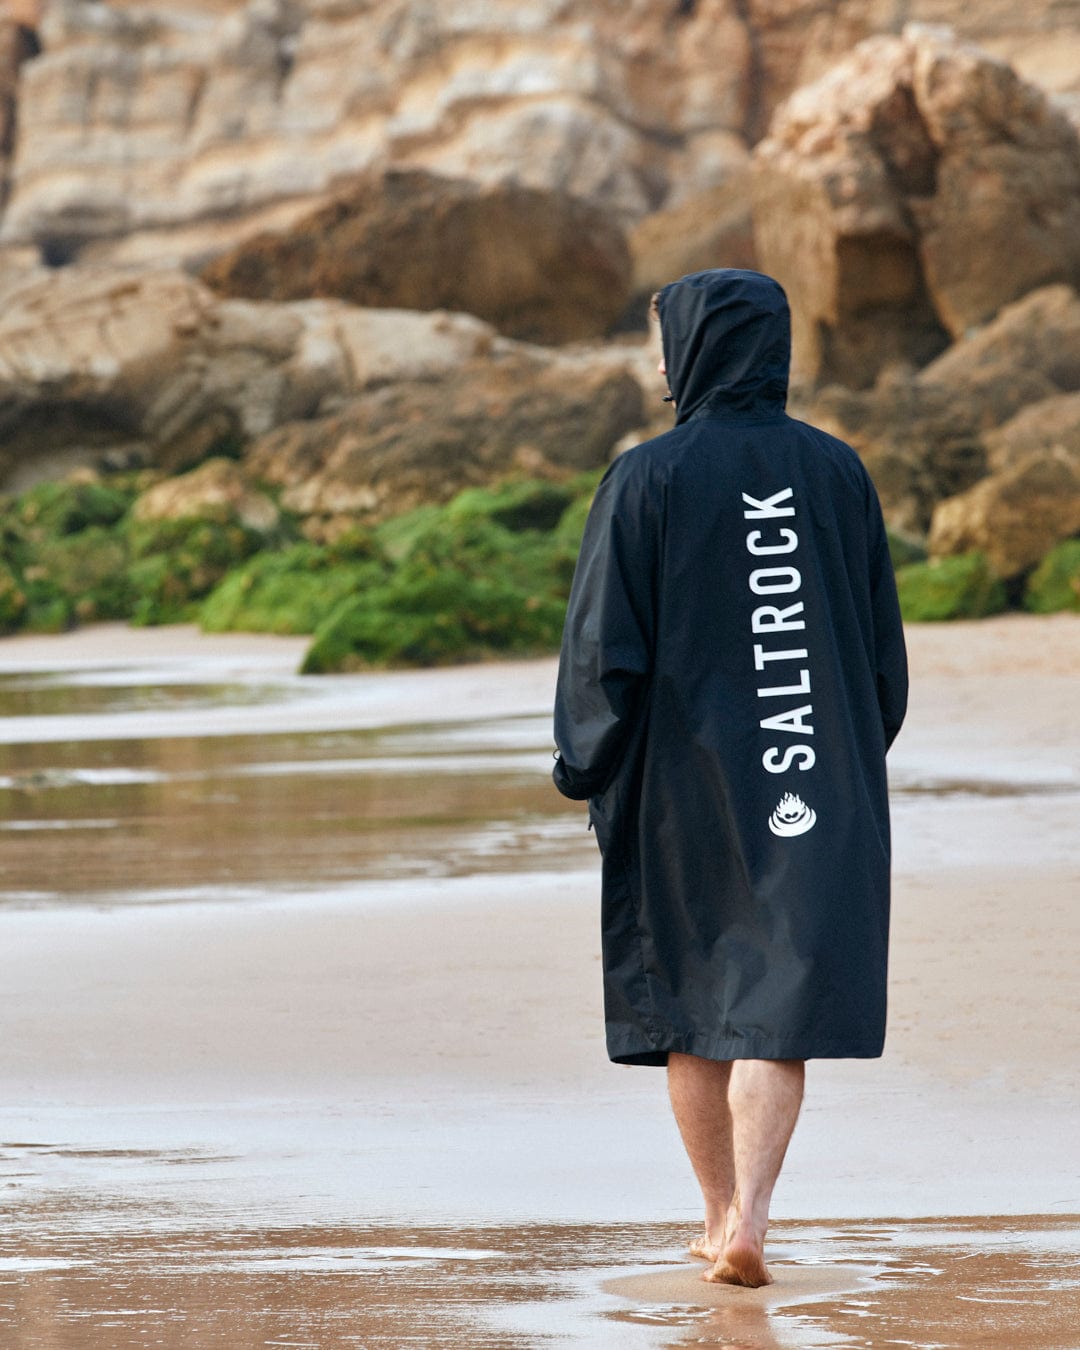 Person wearing a Saltrock 3 in 1 Recycled Four Seasons Changing Robe - Black/Yellow with "Saltrock" logo and towelling lining, standing on a sandy beach facing rocky cliffs.